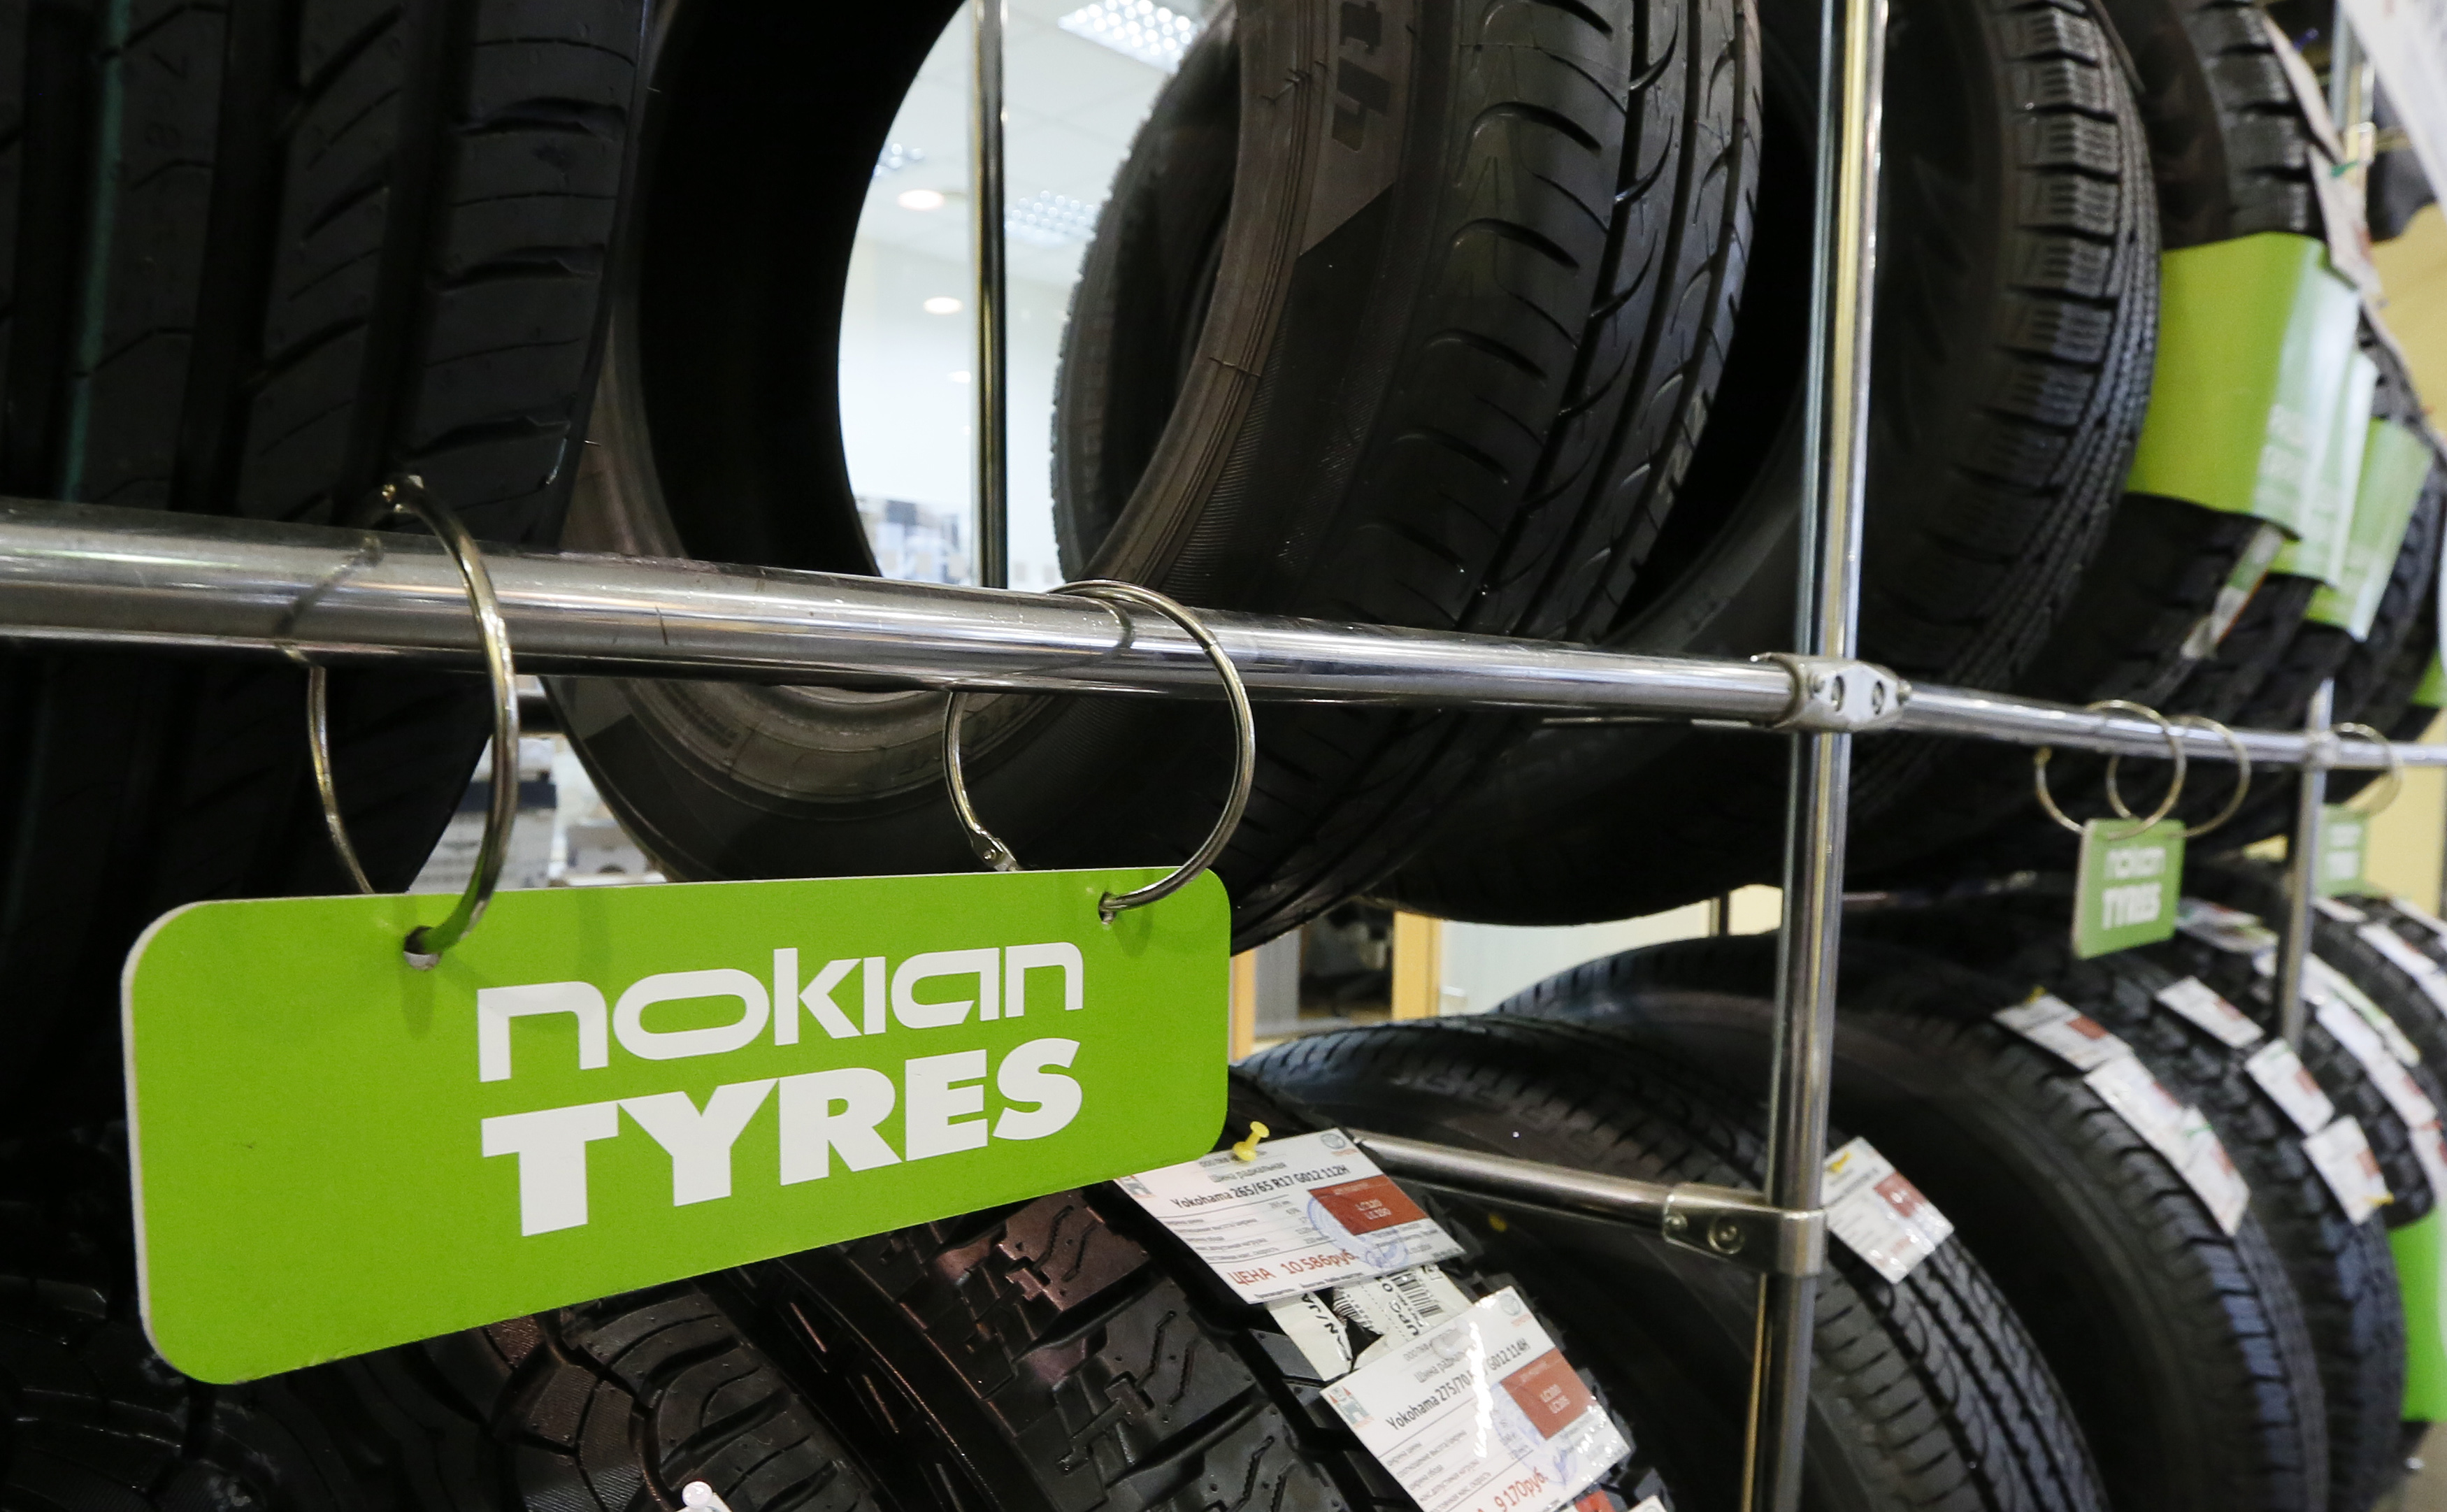 Nokian tyres are pictured on display at the 